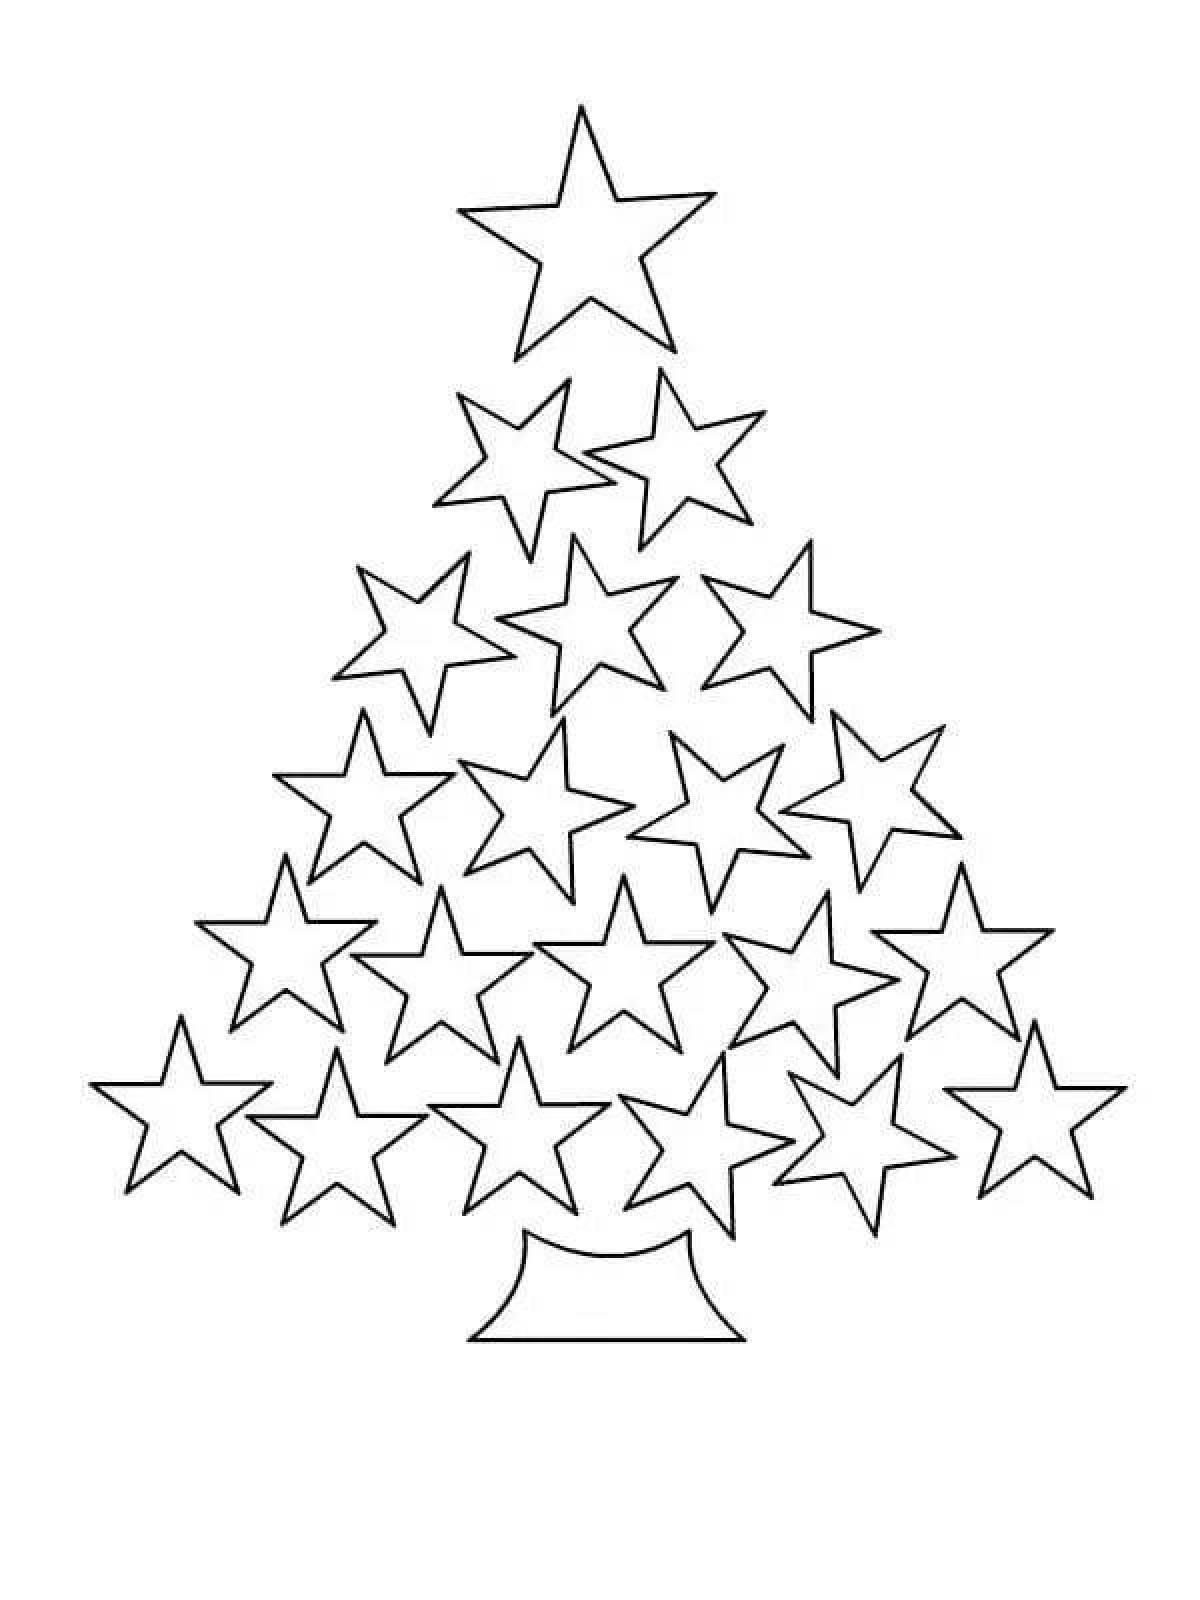 Coloring majestic Christmas star